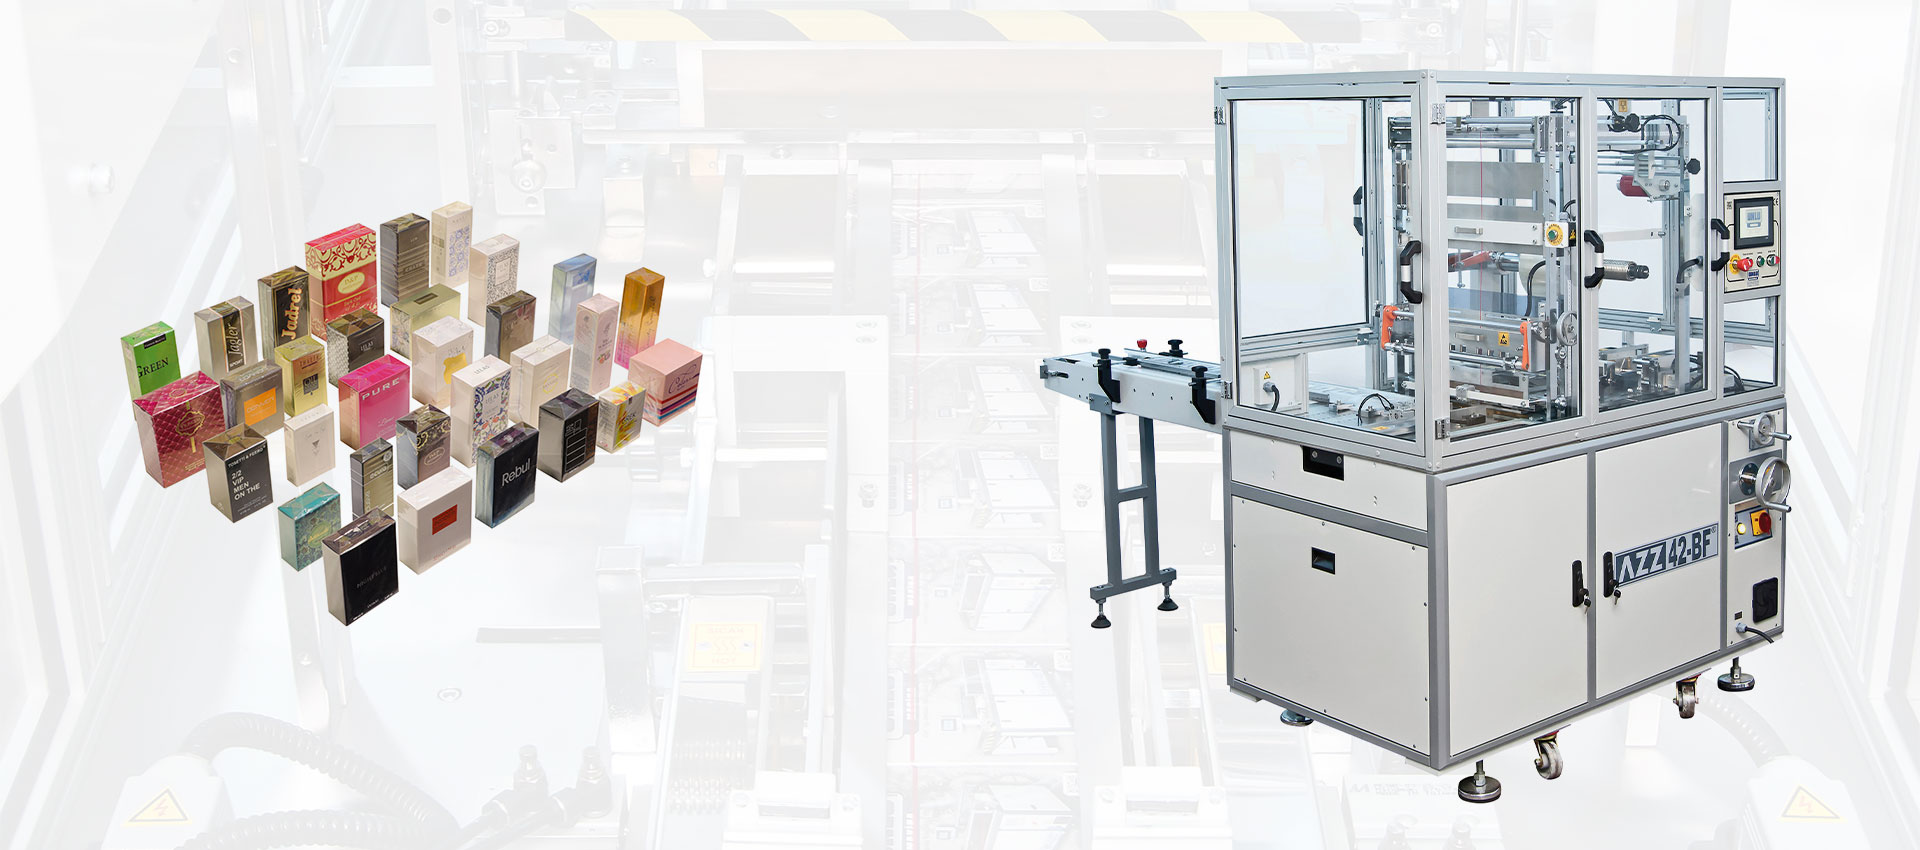 AZZ 42 | BF CLASSIC AUTOMATIC - ENVELOPE TYPE BOX PACKAGING MACHINE